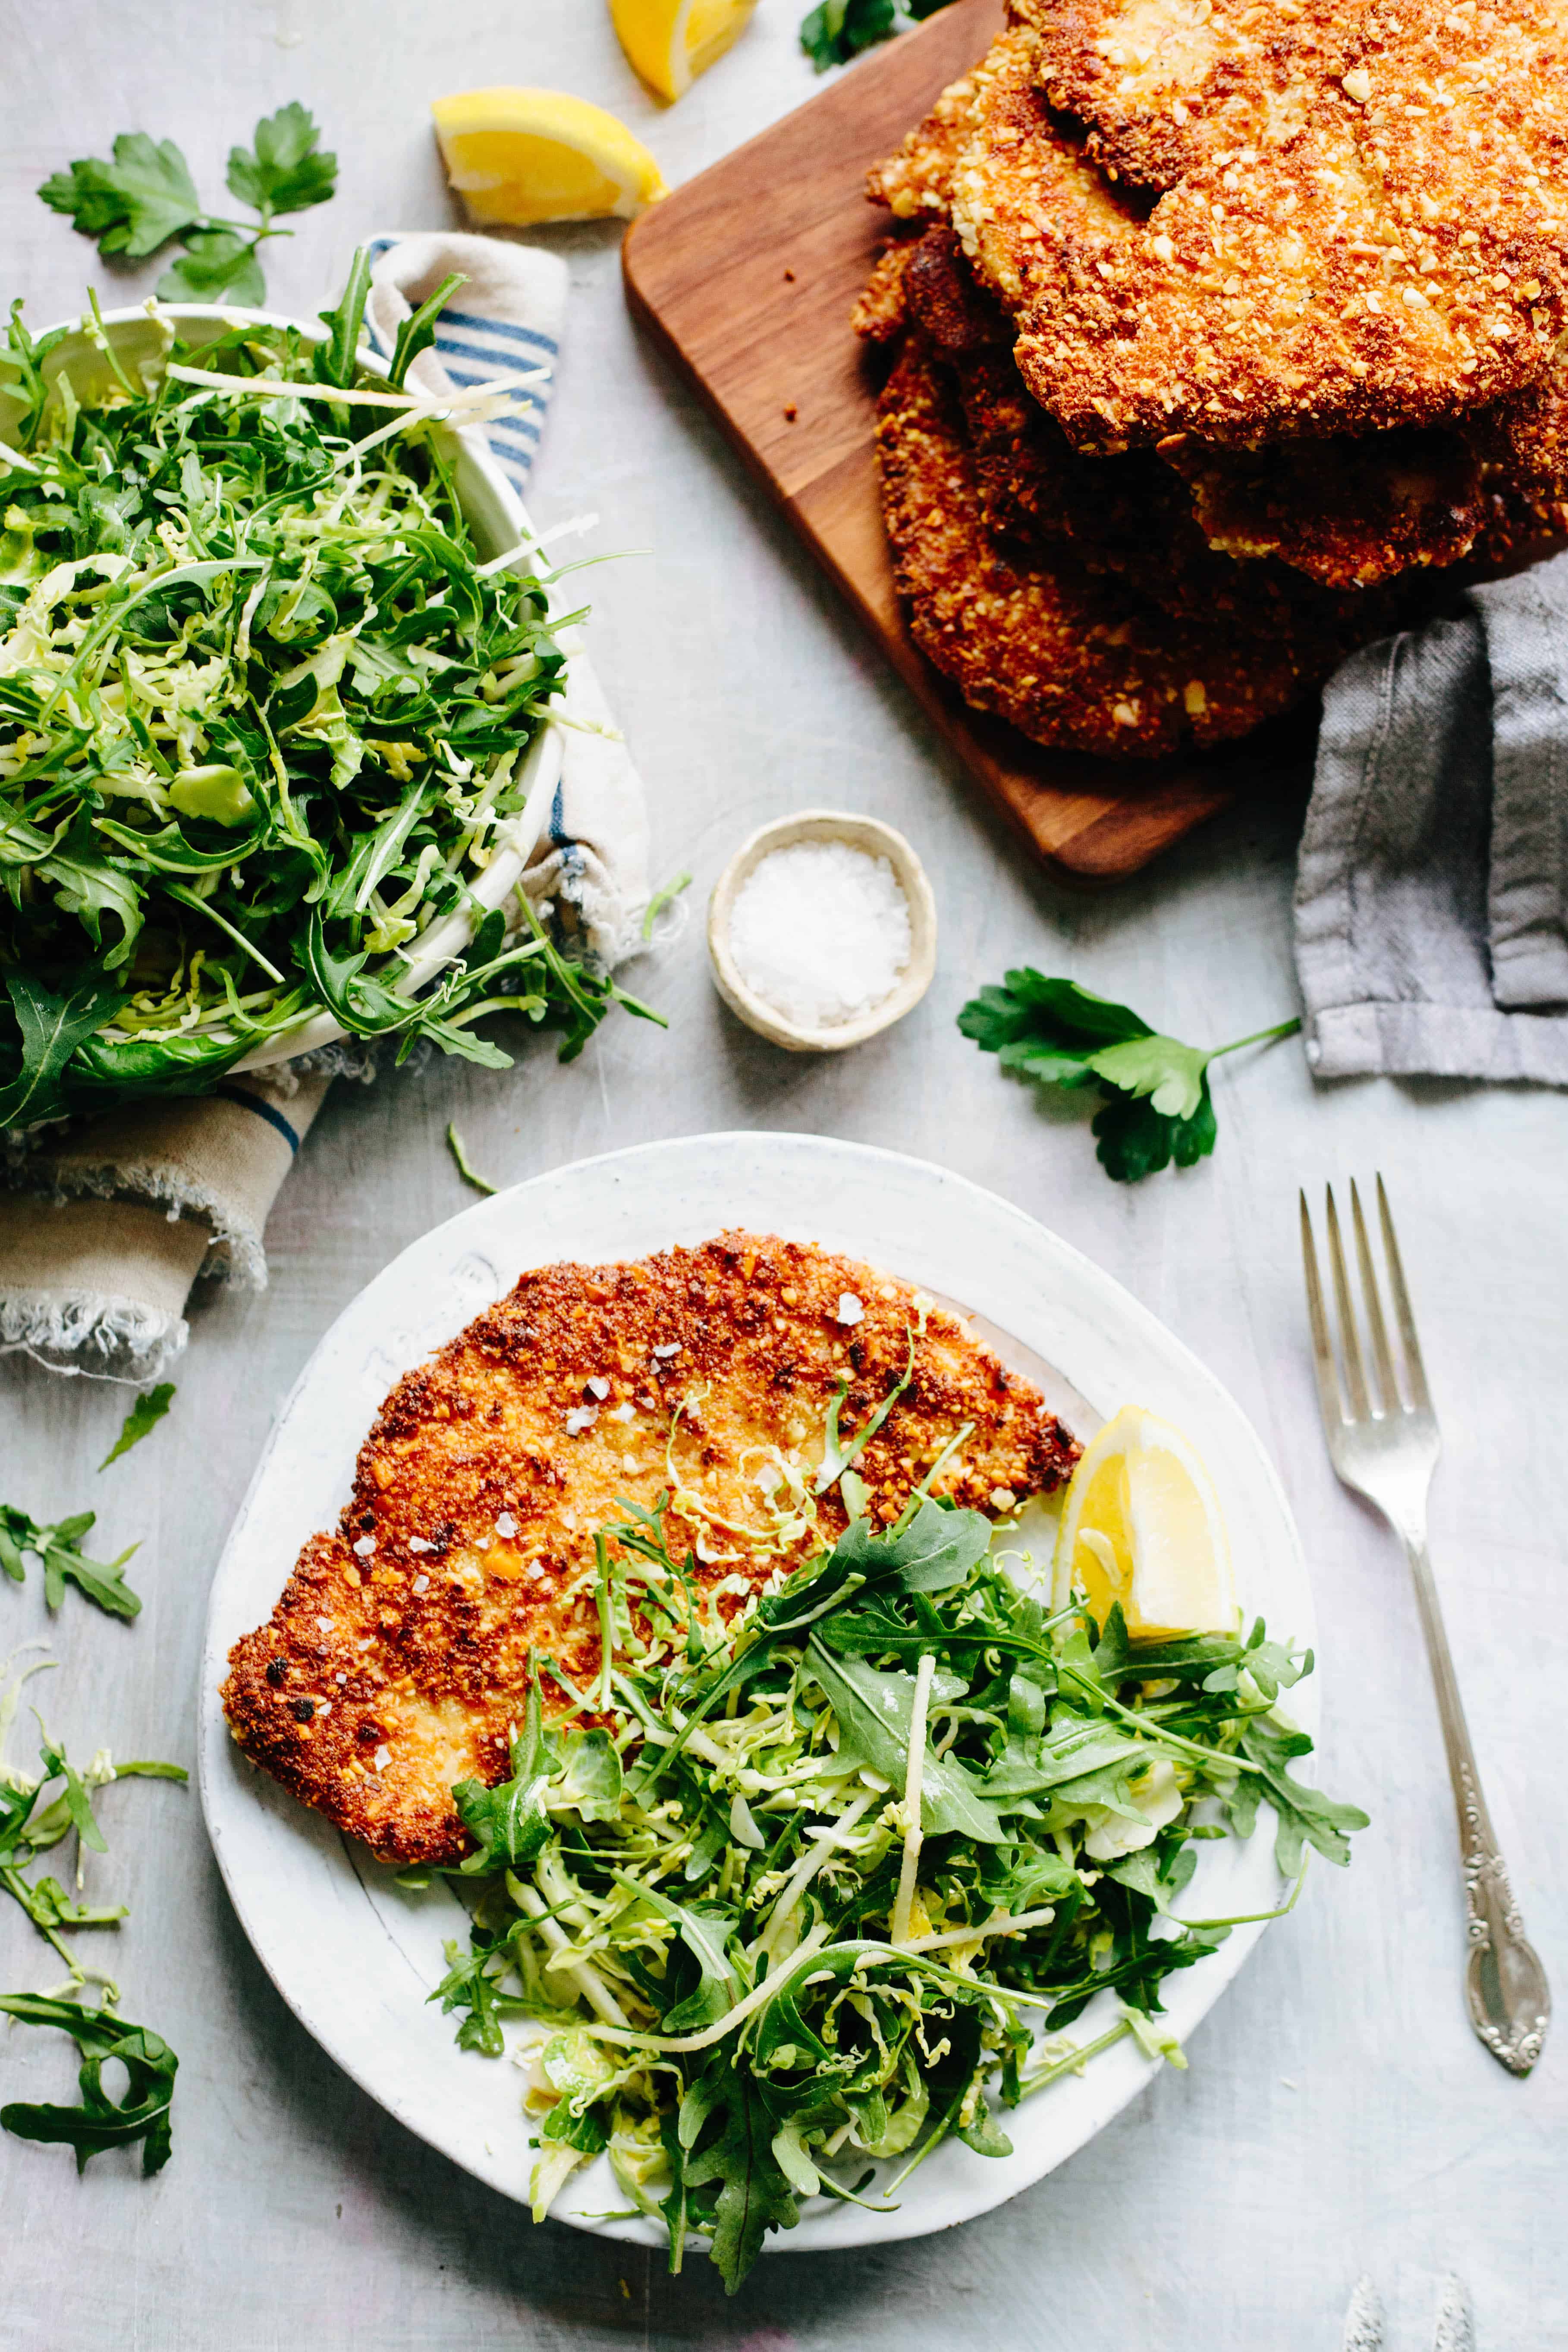 Almond chicken cutlets with apple, arugula + brussels sprout salad